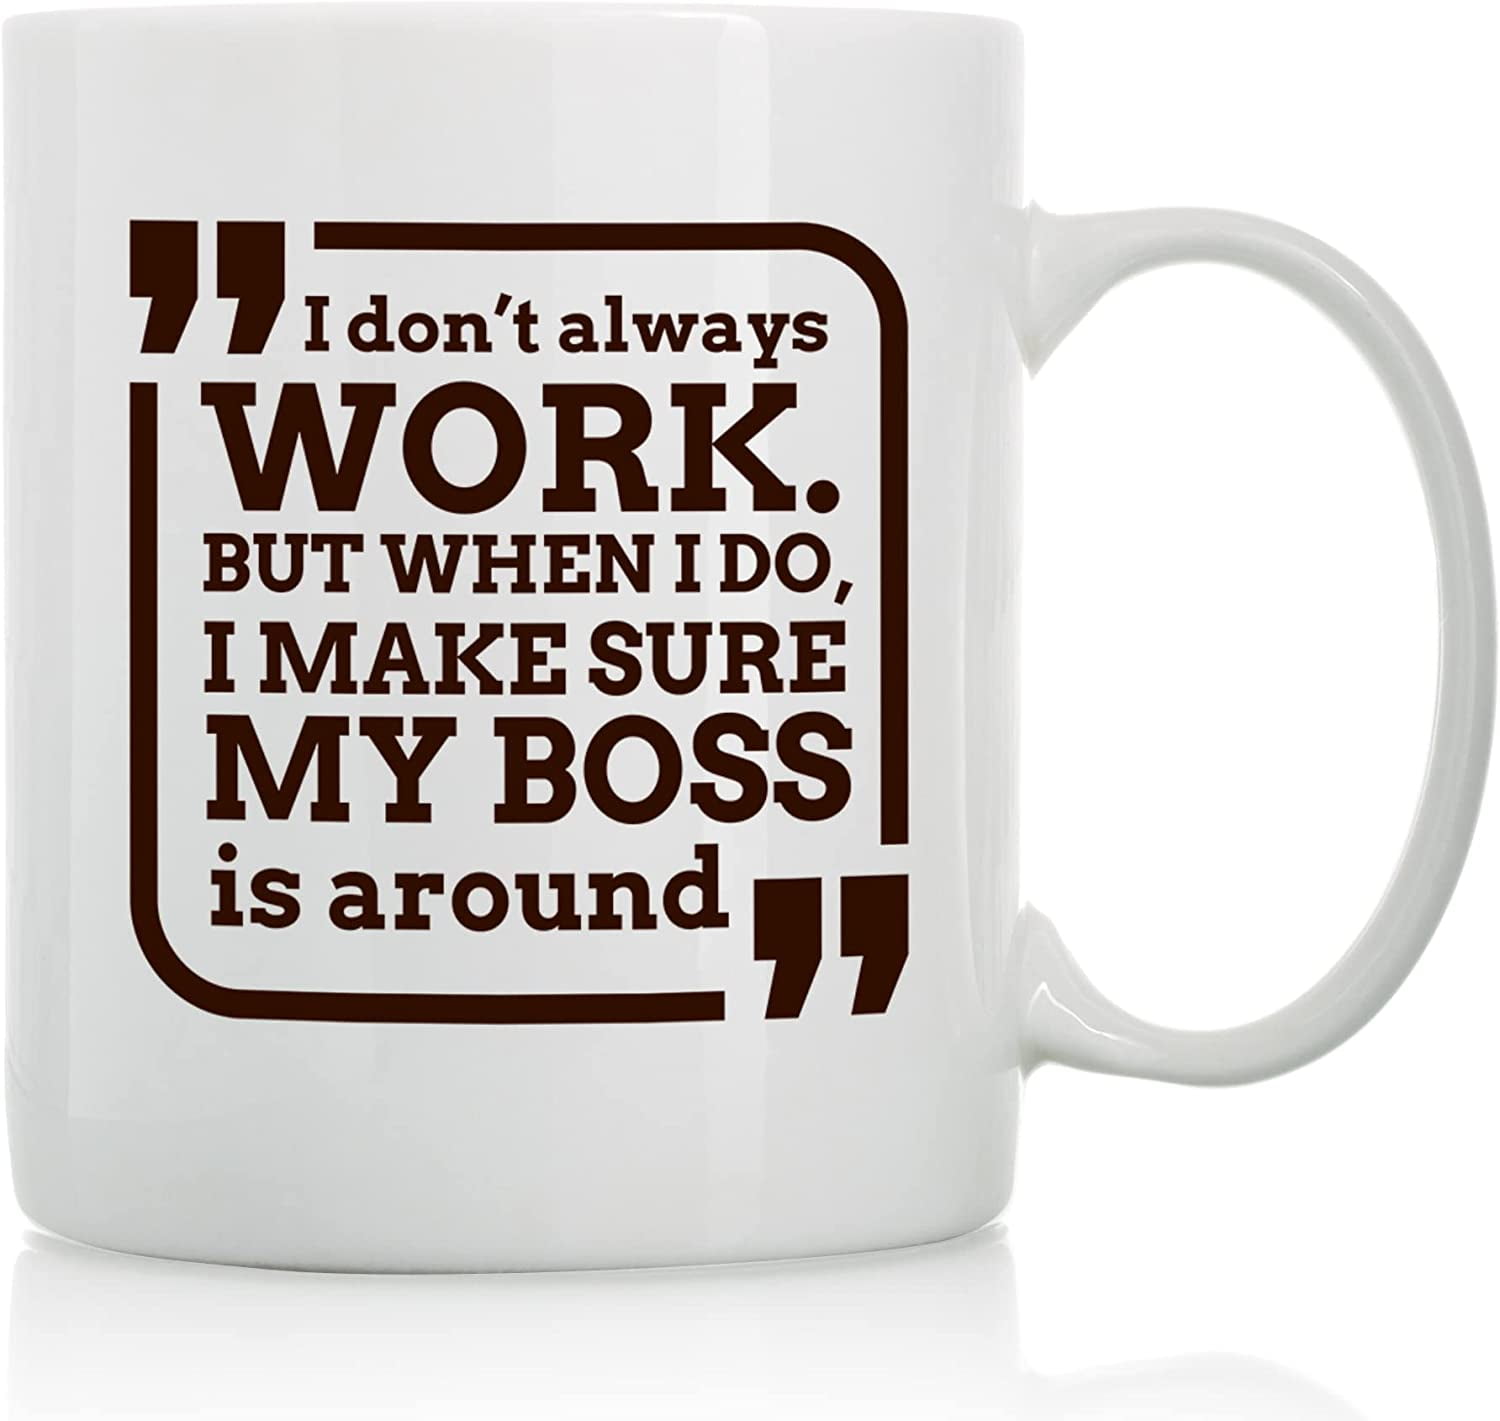 Funny coffee mug quotes for Wife & Mom – The Artsy Spot